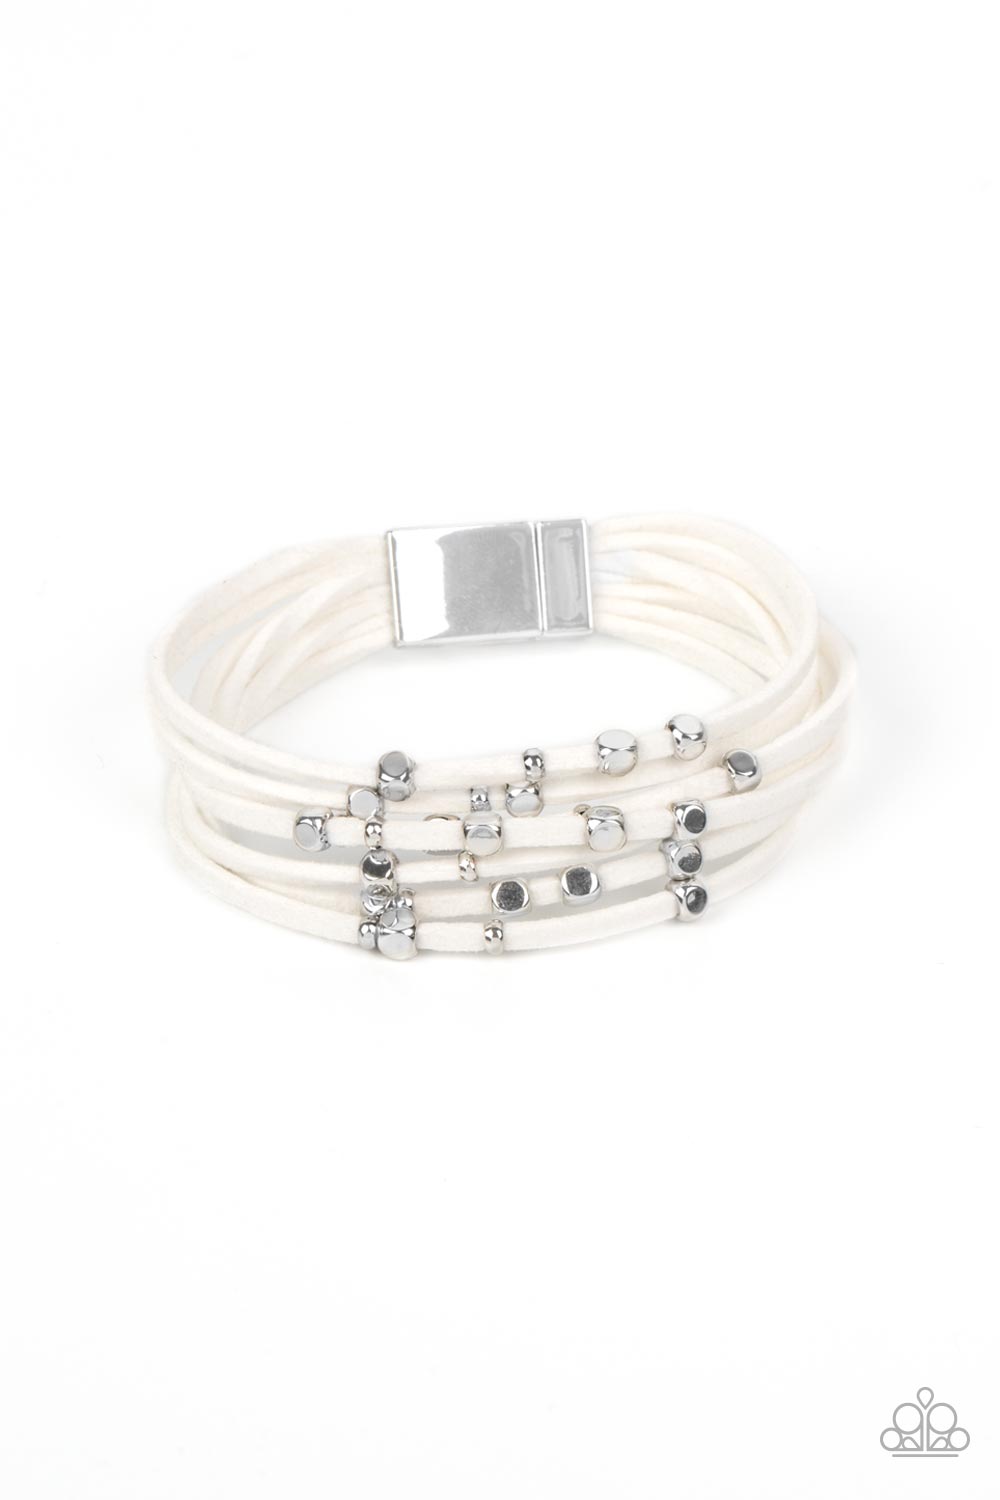 Paparazzi Bracelets - Clustered Constellations - White